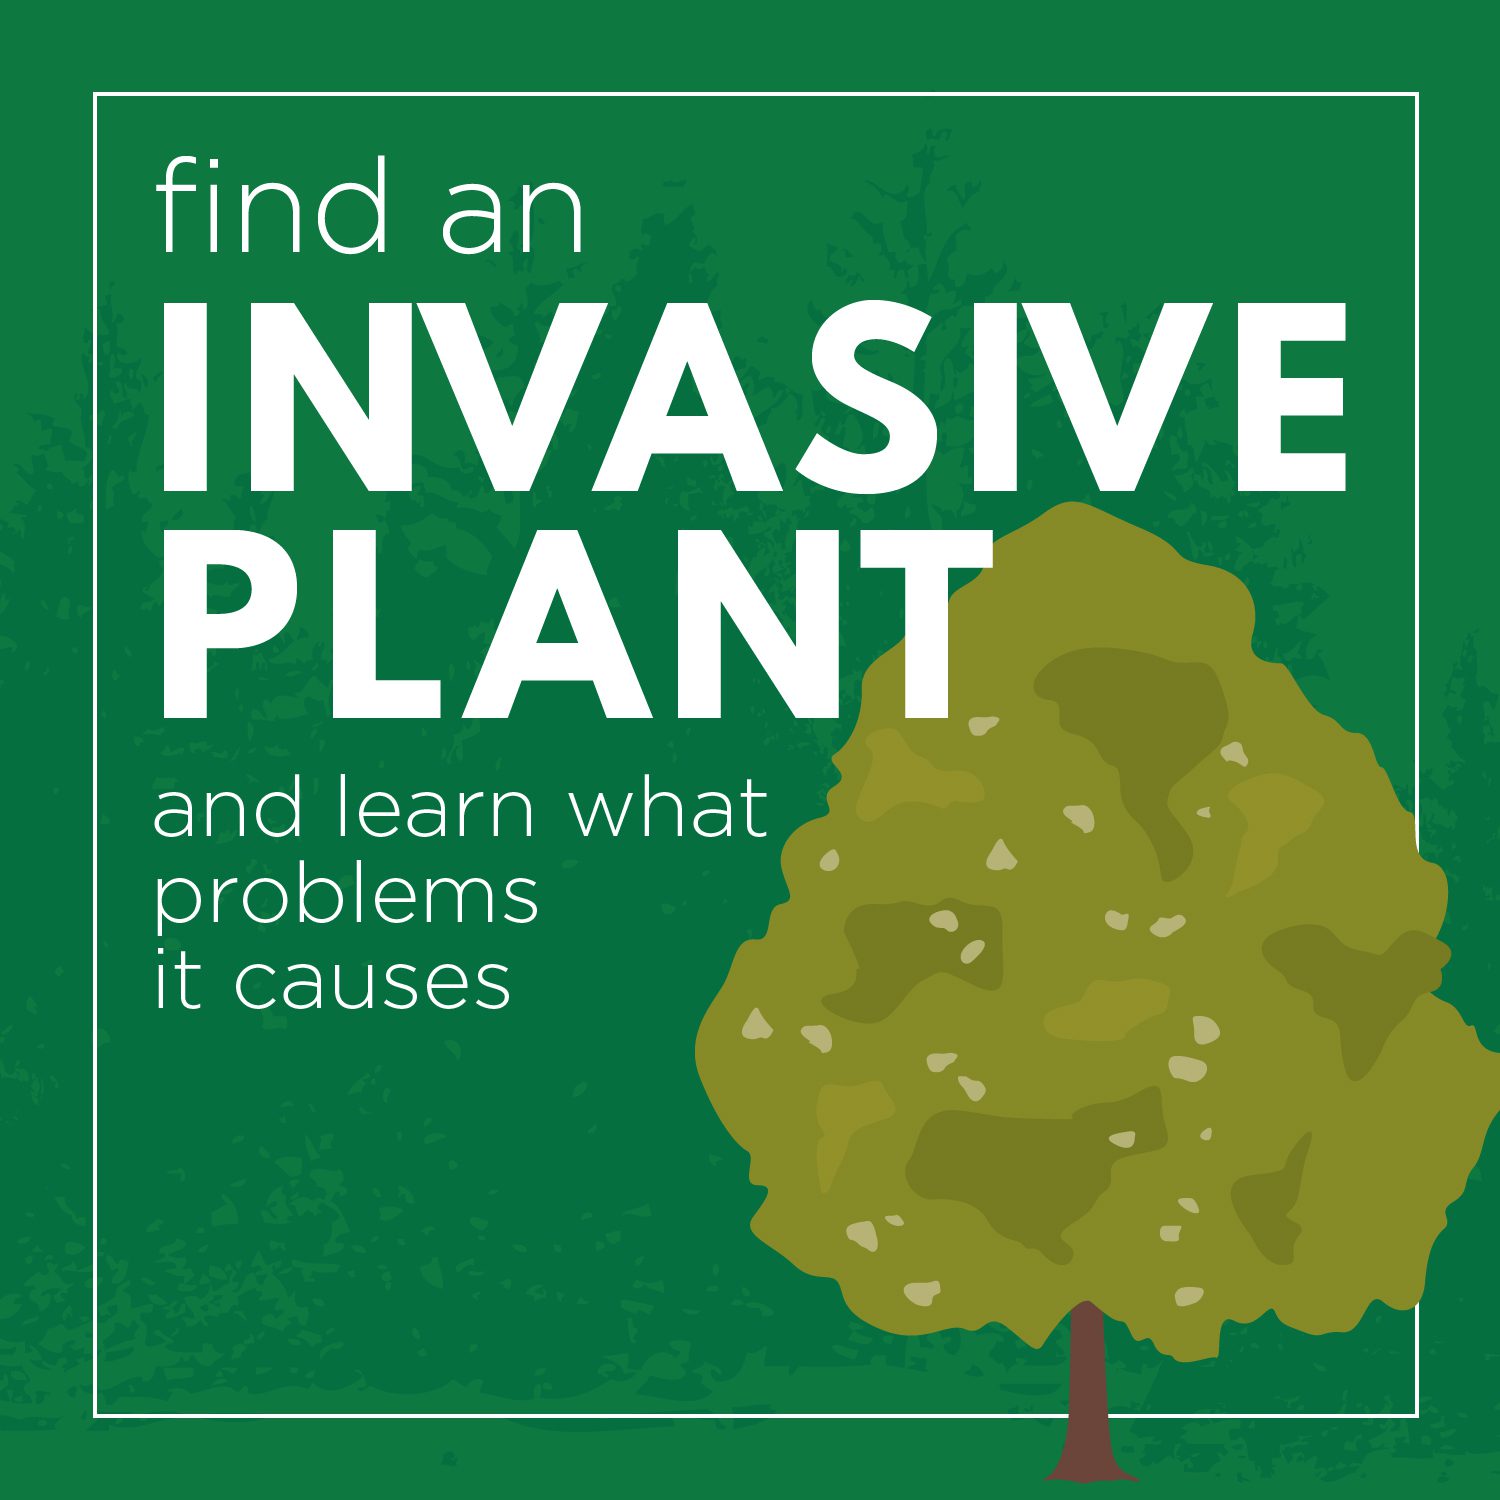 Find an invasive plant and learn what problems it causes